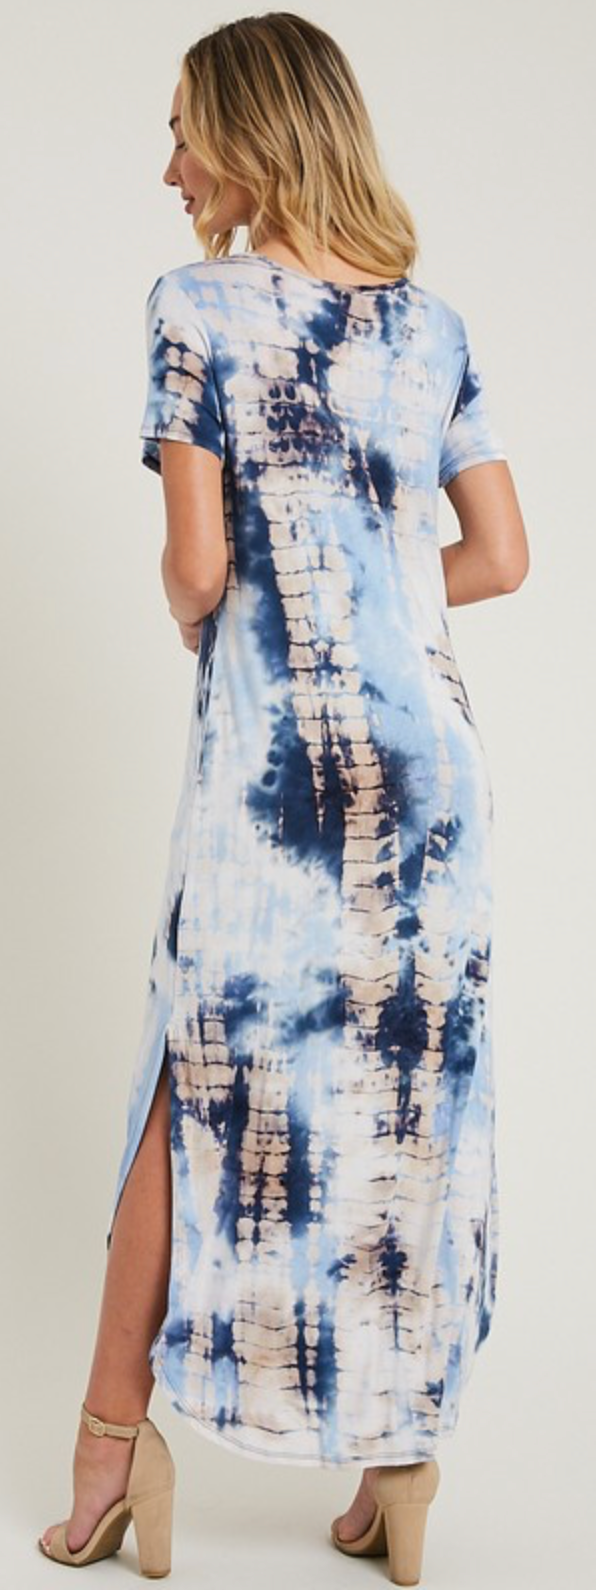 dazzling tie dye in shades of navy peach and white